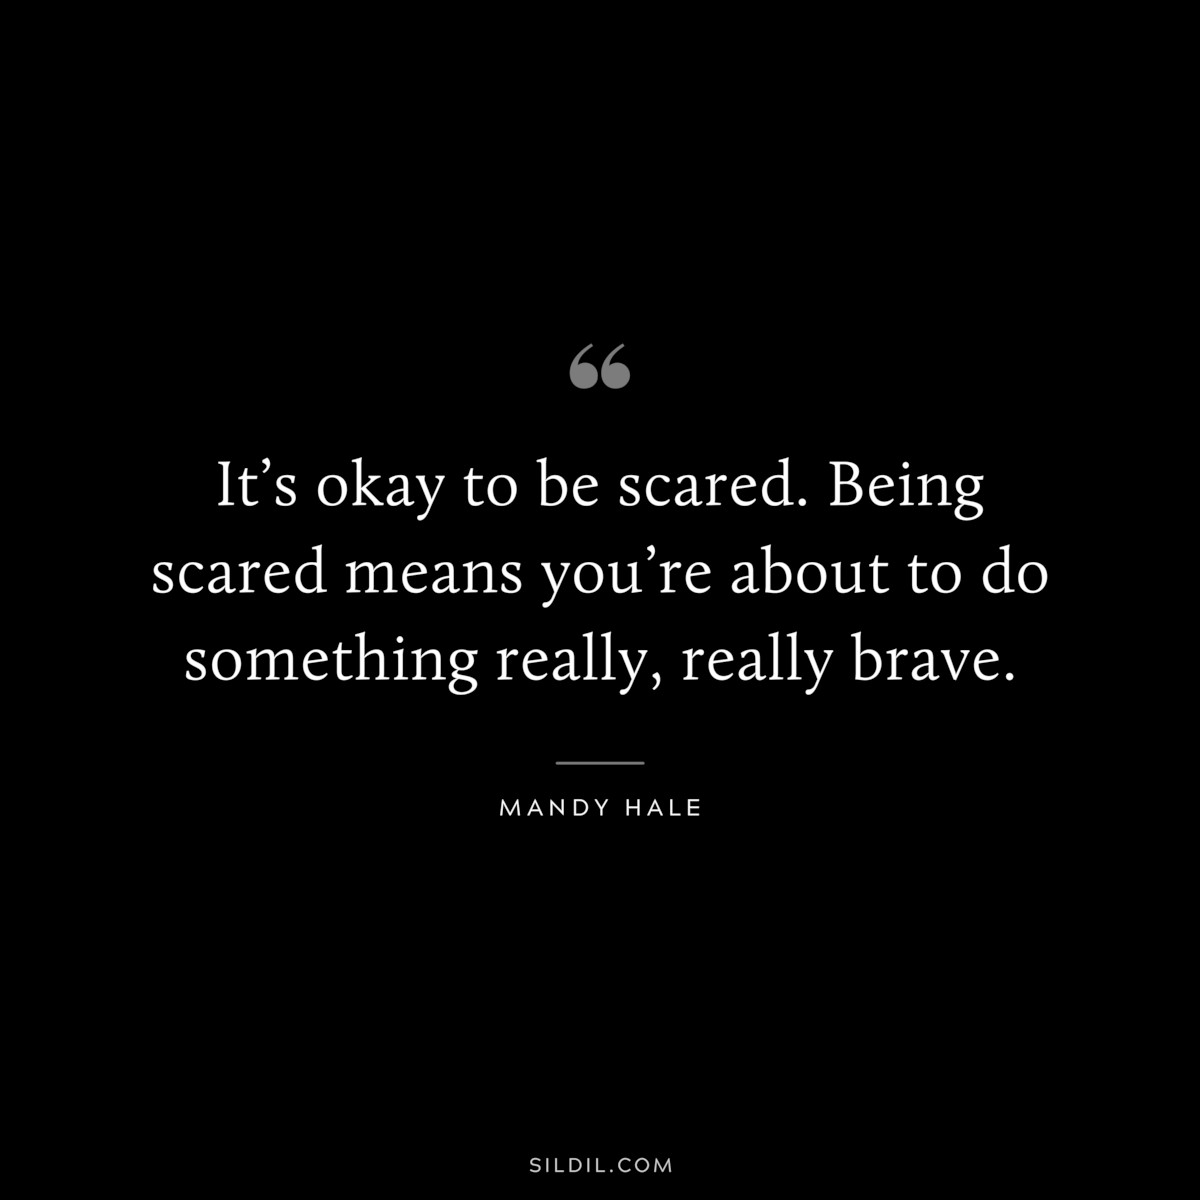 It’s okay to be scared. Being scared means you’re about to do something really, really brave. ― Mandy Hale